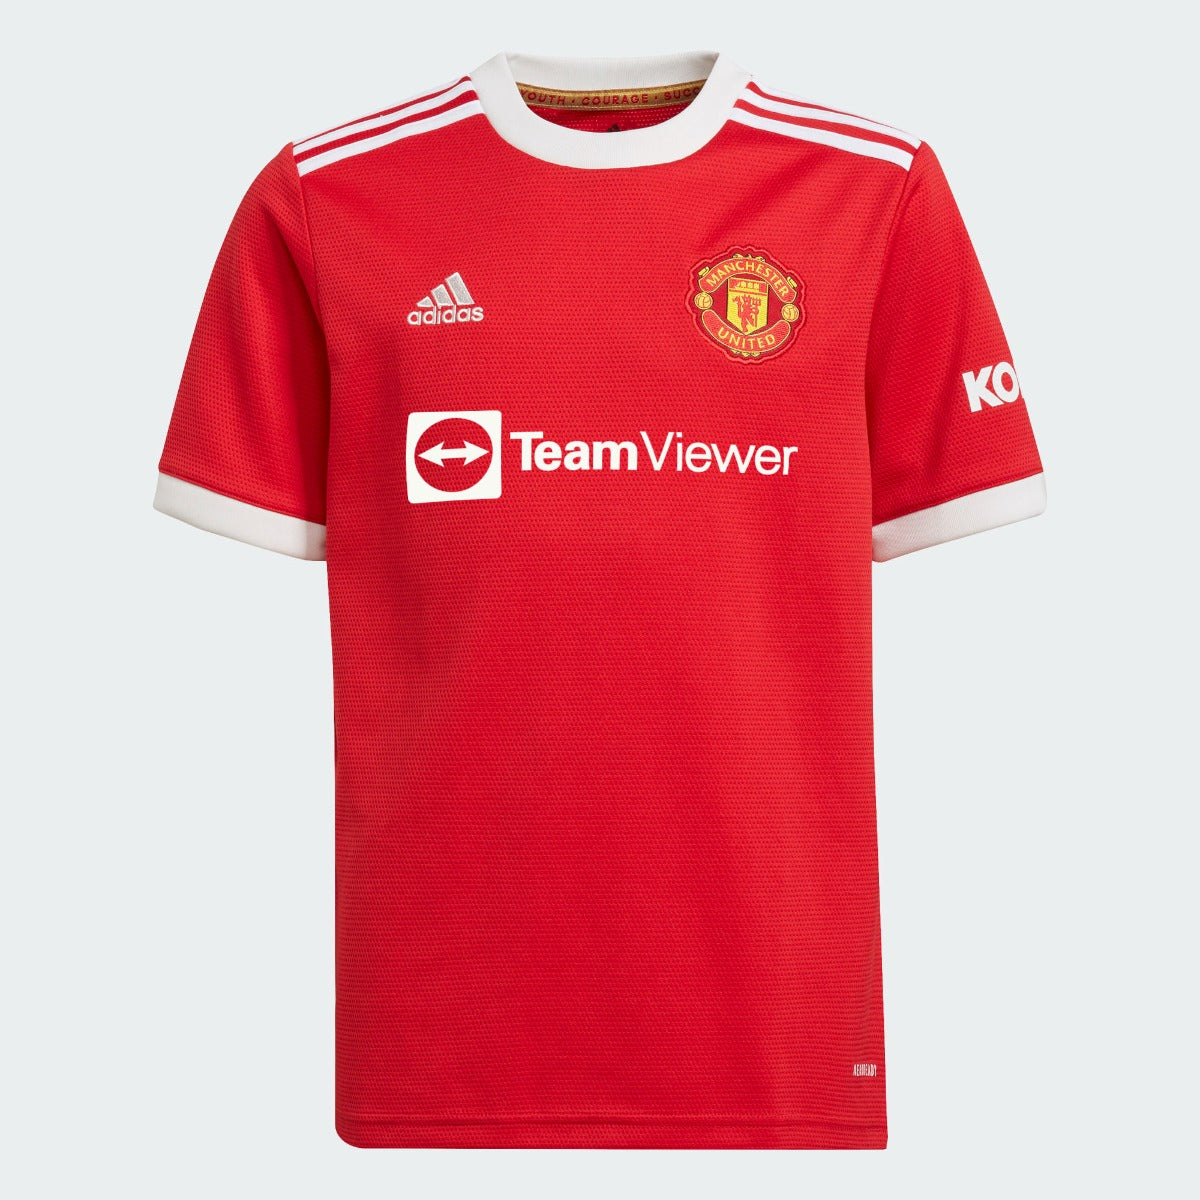 Adidas 2021-22 Manchester United Youth Home Jersey - Red-White (Front)